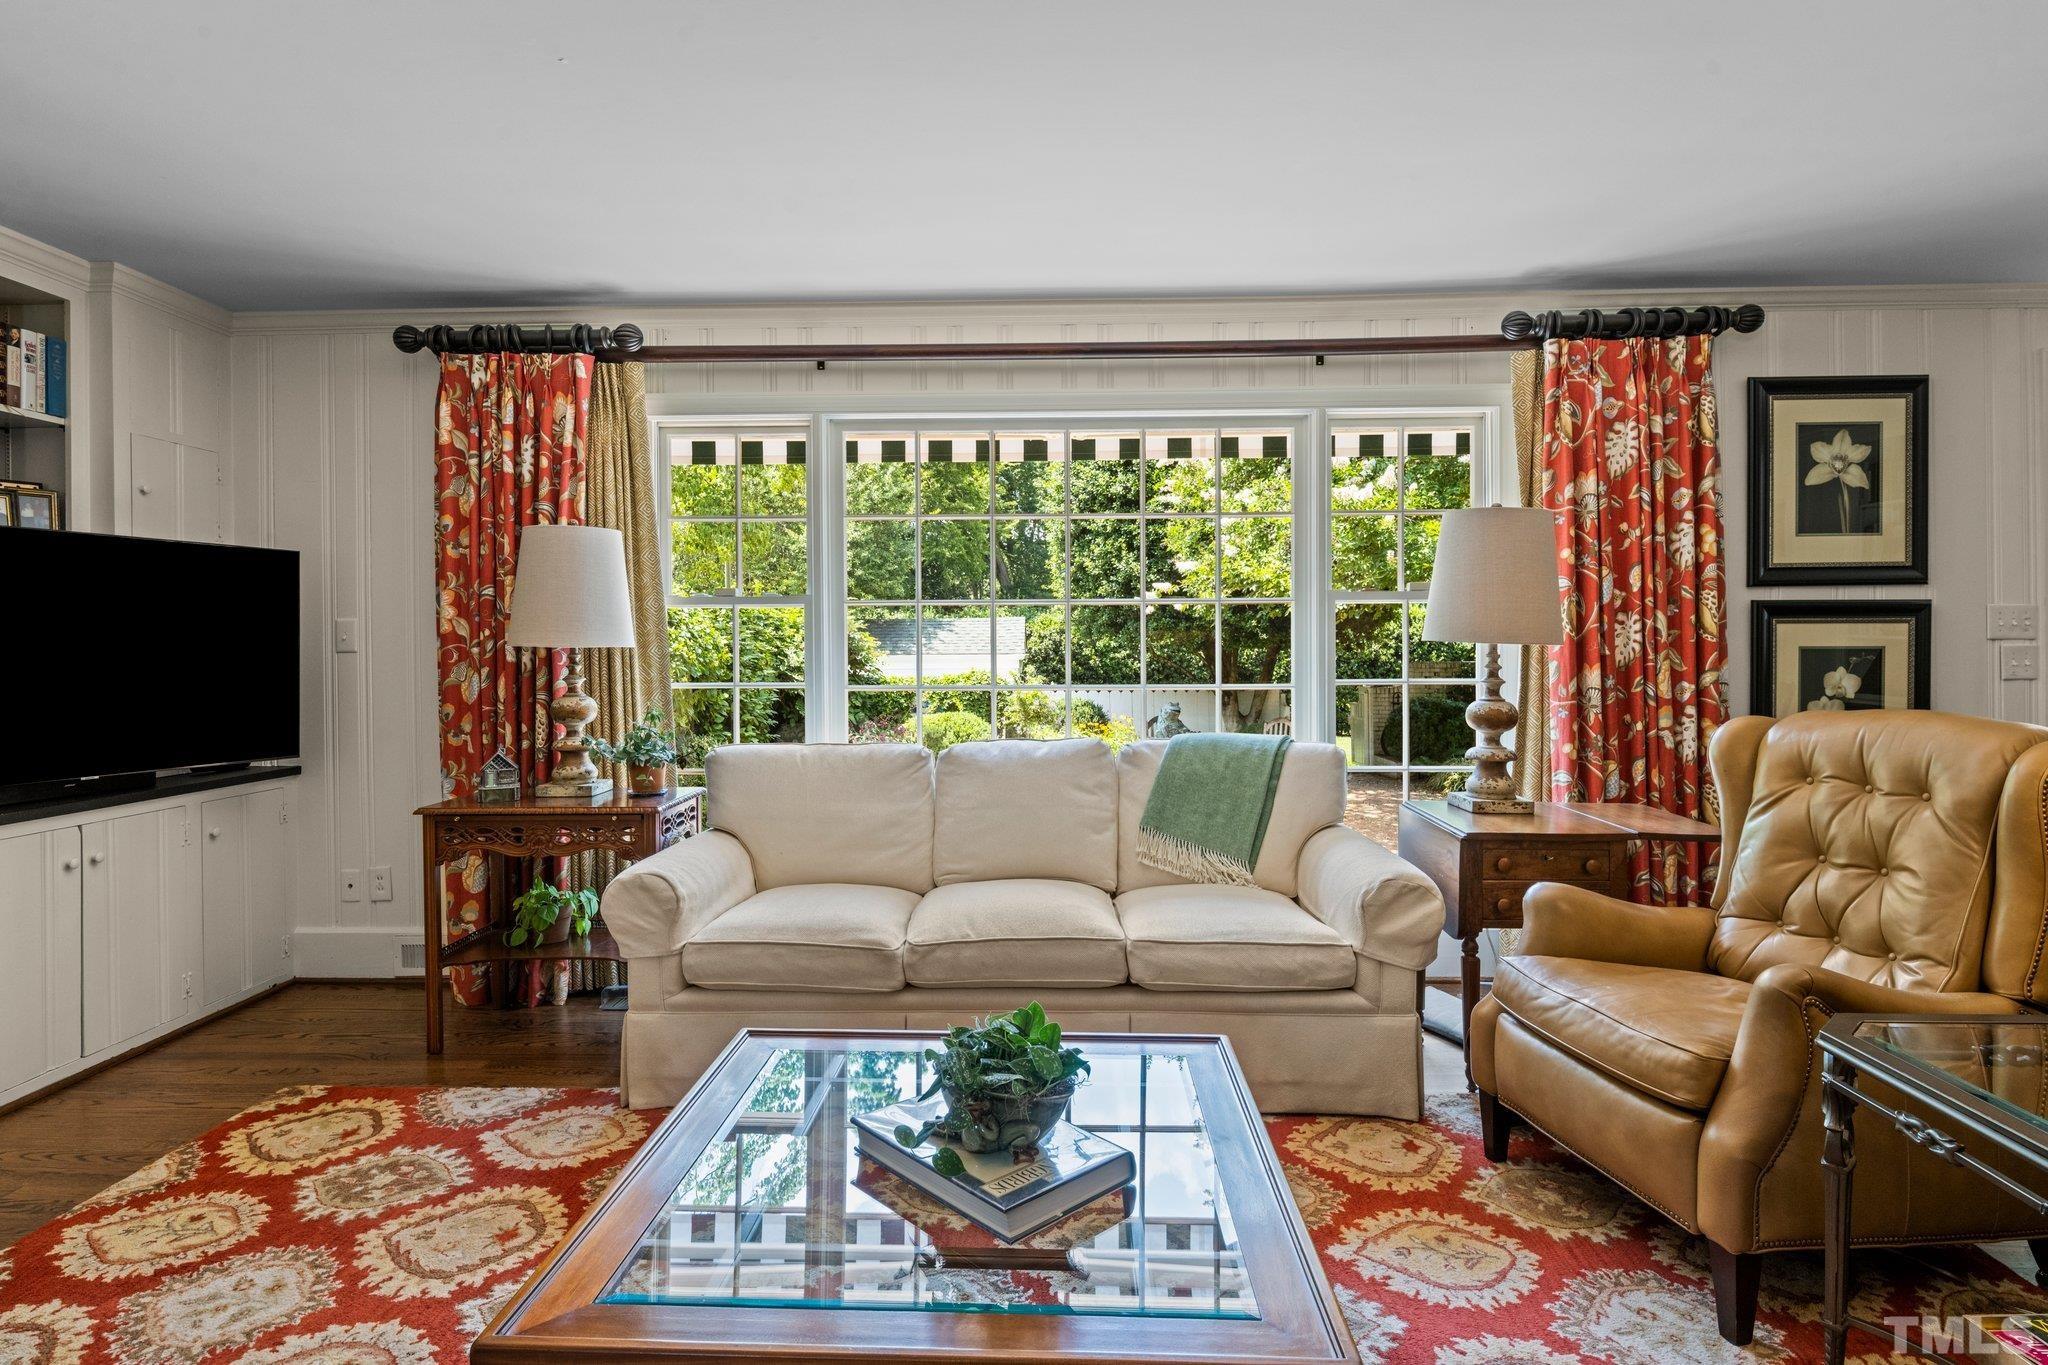 Large window allows natural light inside and views of the gorgeous garden/patio area.